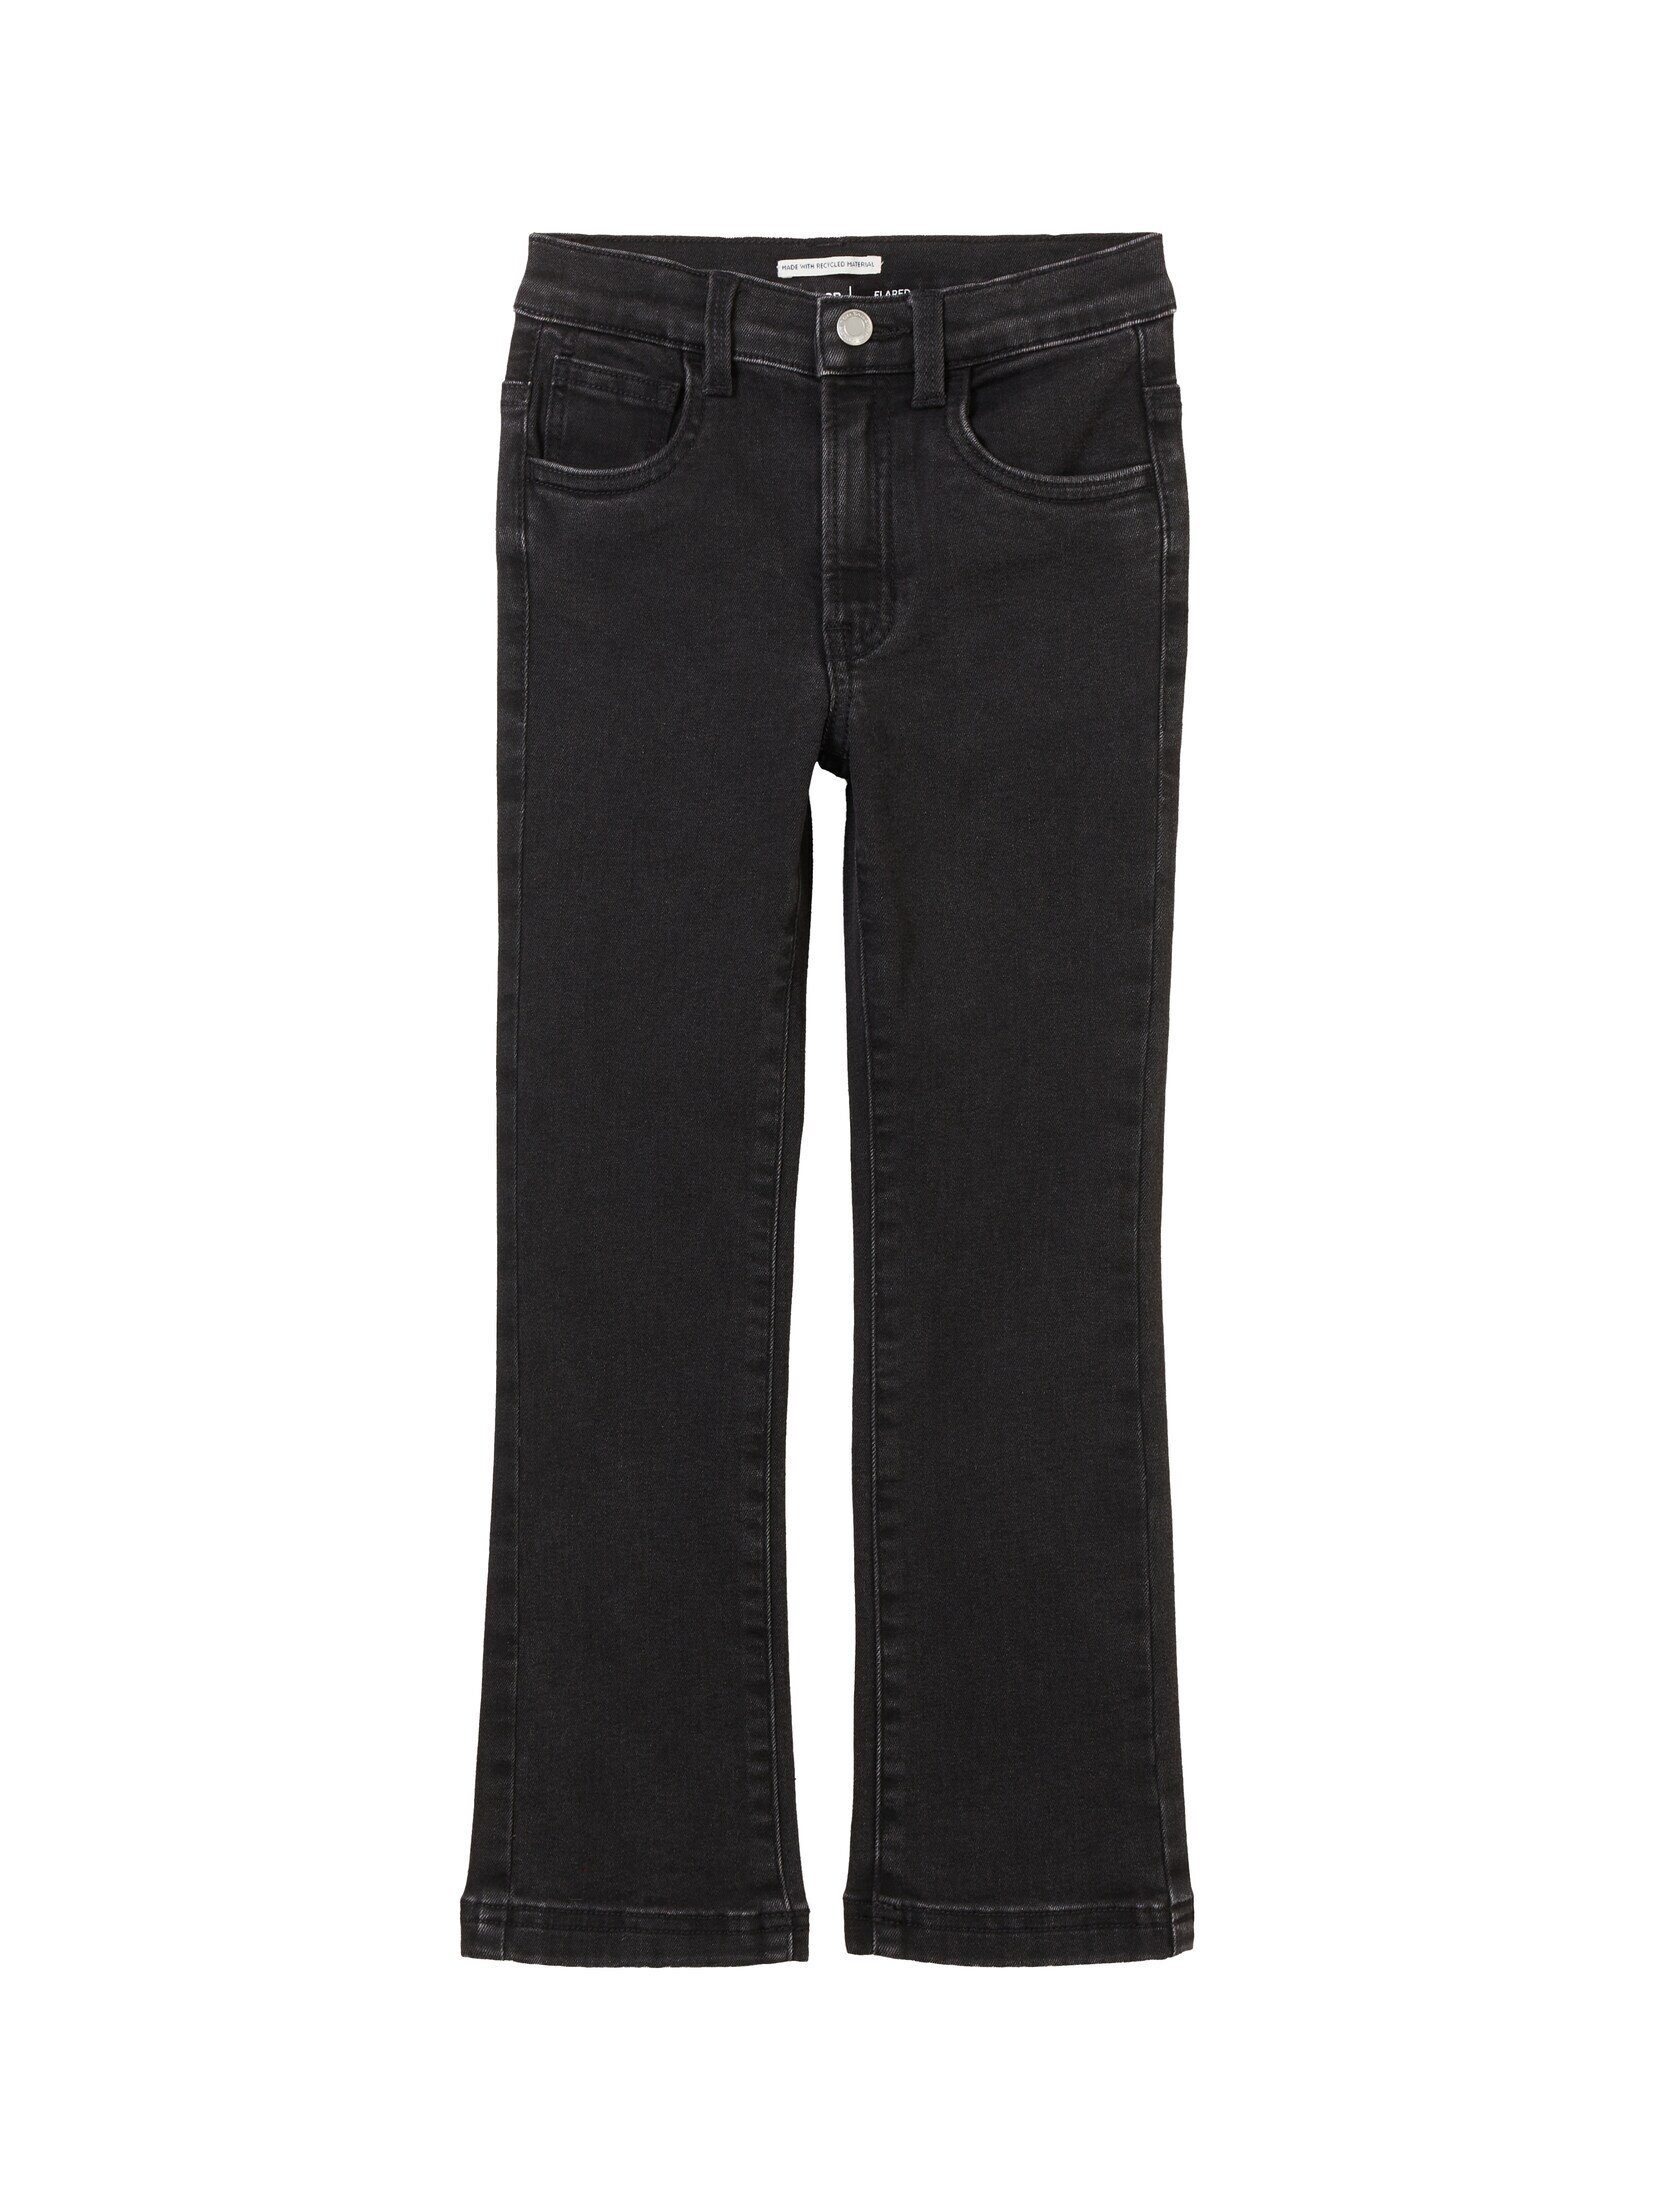 TOM TAILOR Ankle-Jeans Ausgestellte Jeans mit recyceltem Polyester